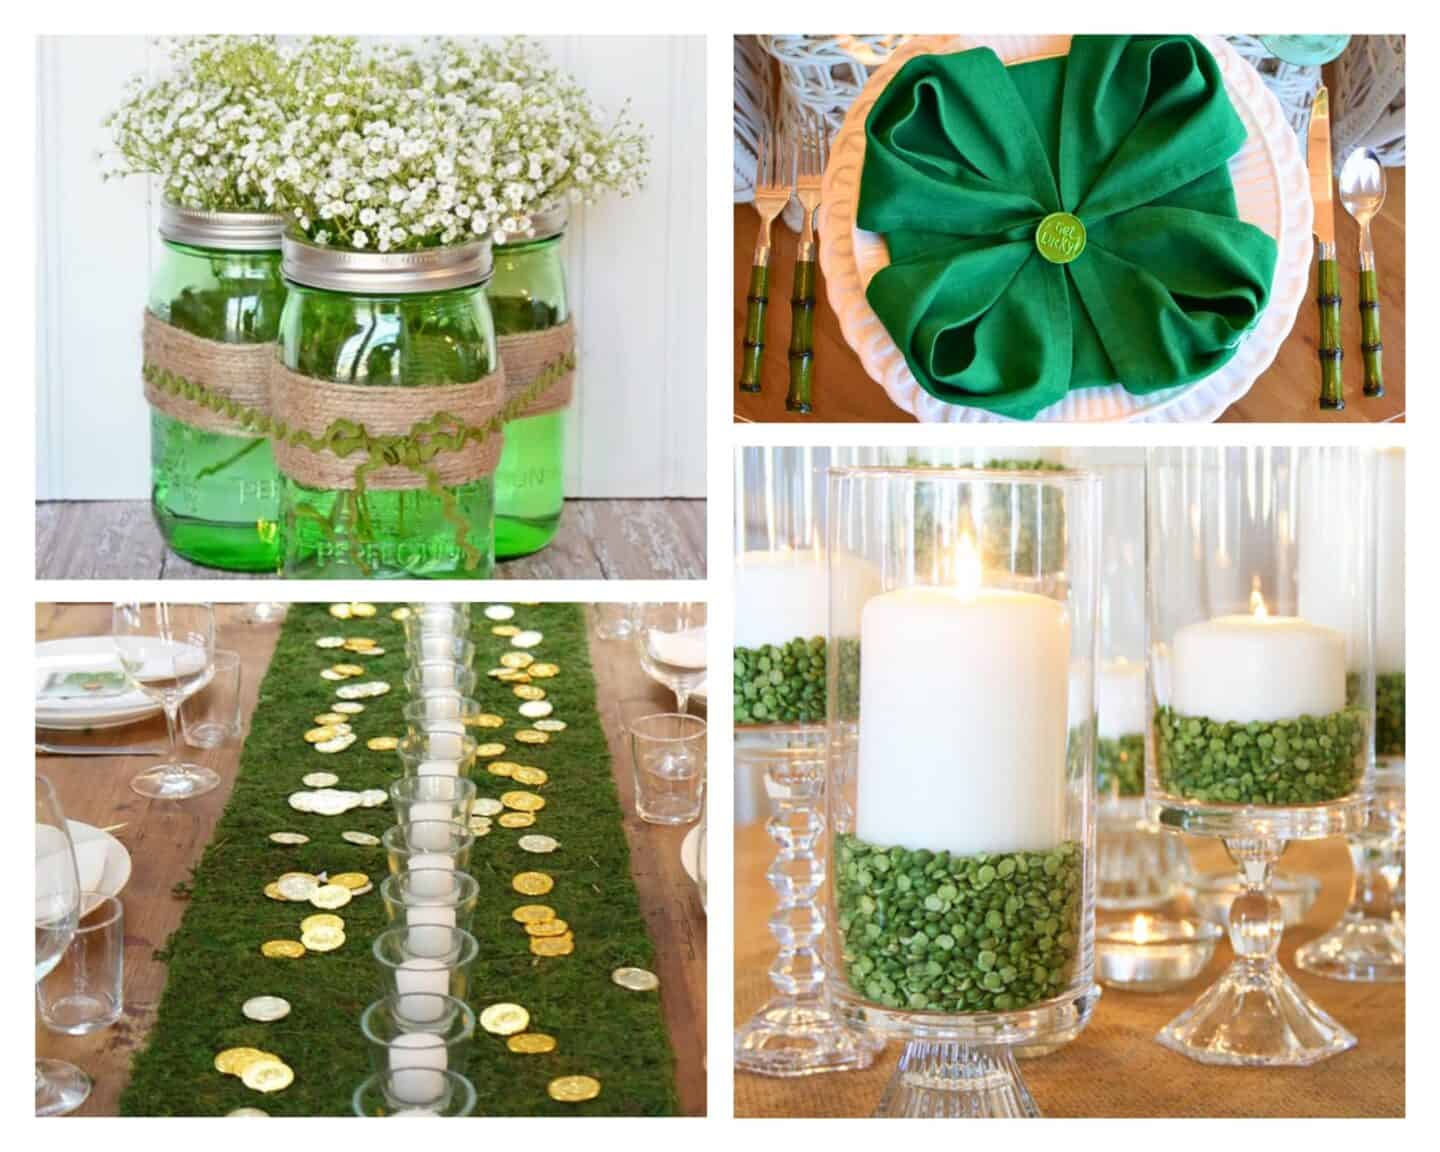 17 st patrick's day table decorations ideas